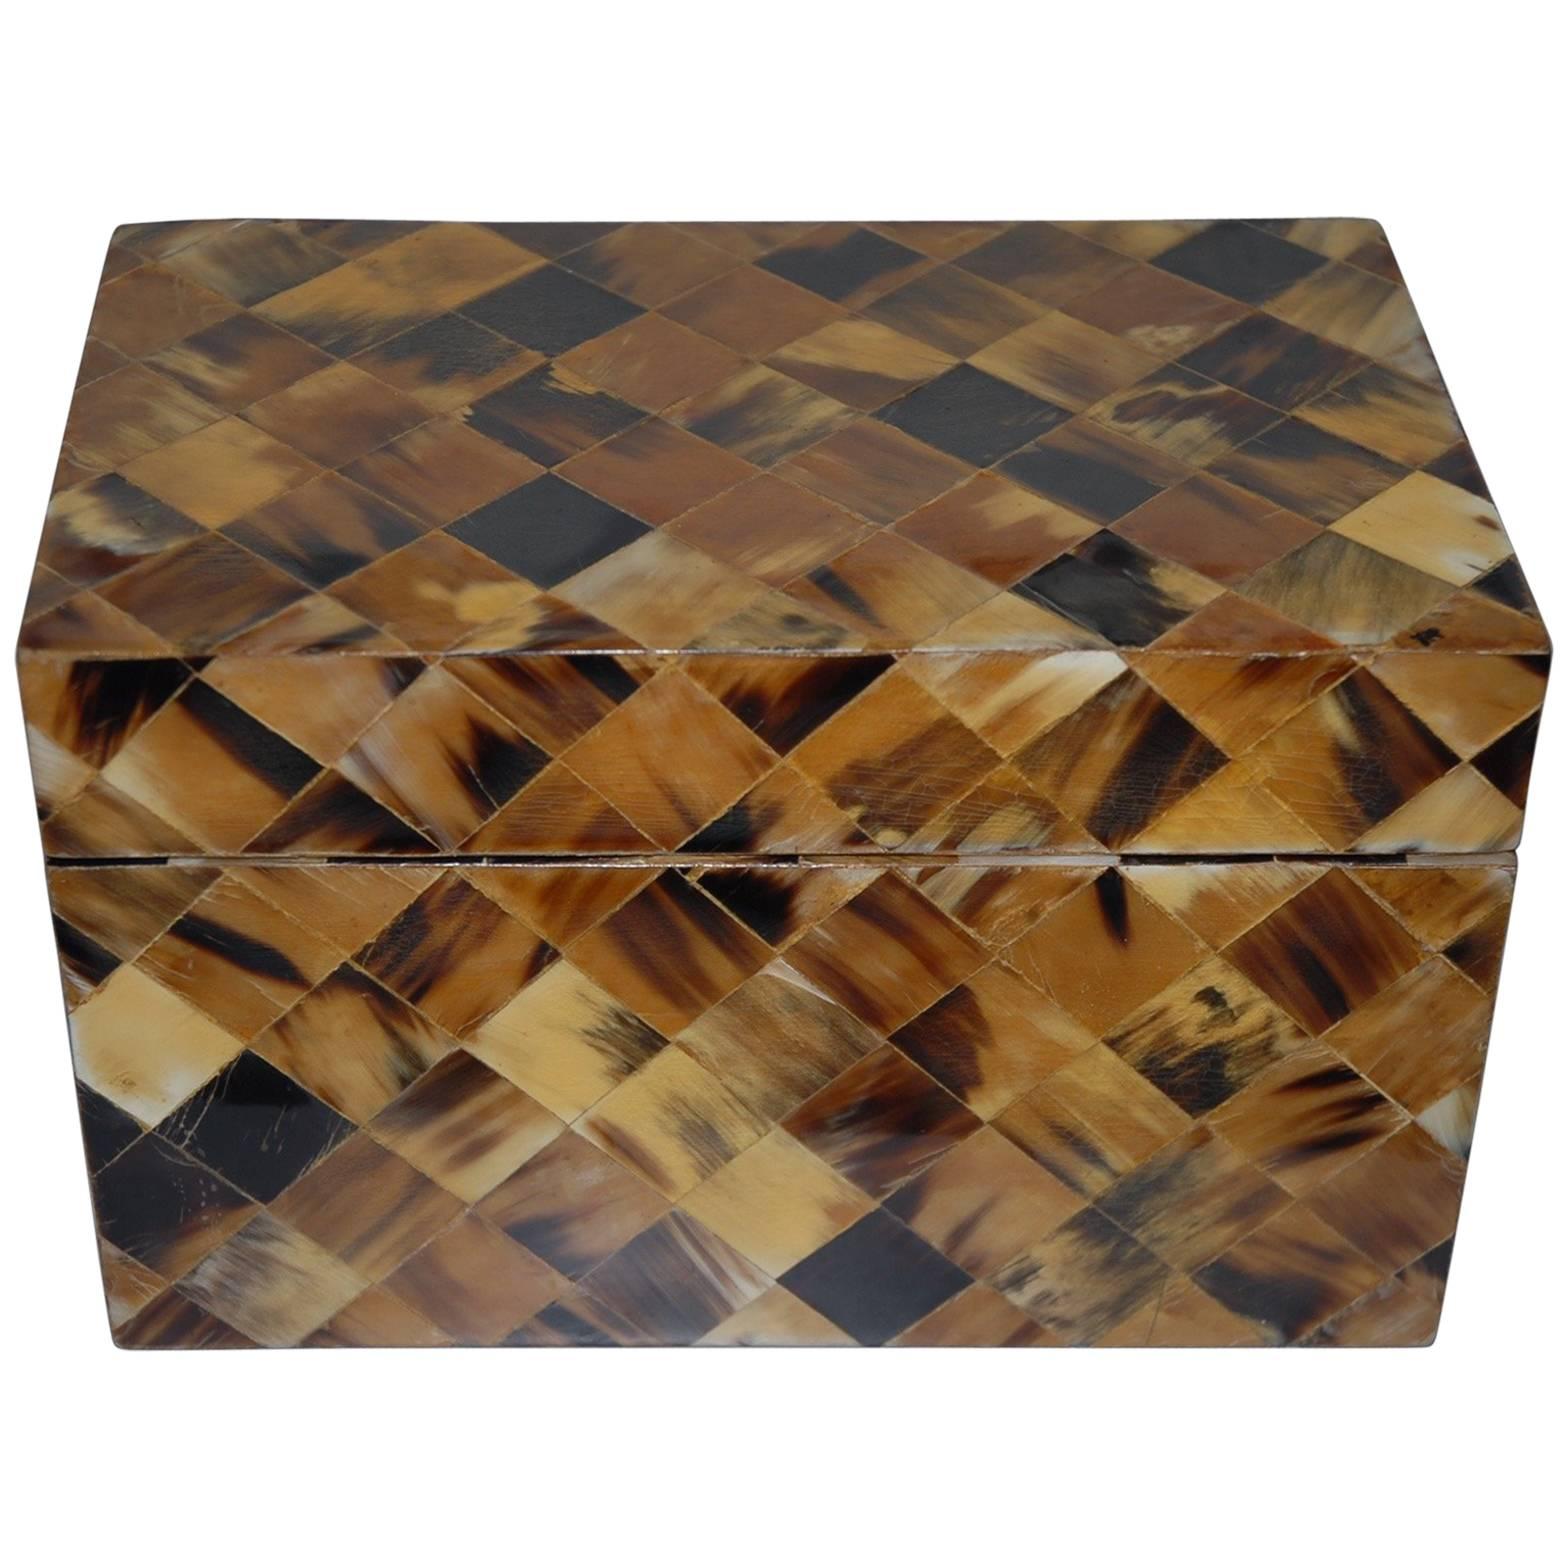 Late 20th Century Hand-Crafted Wooden Organic Treasure Box  Square Design Inlay For Sale